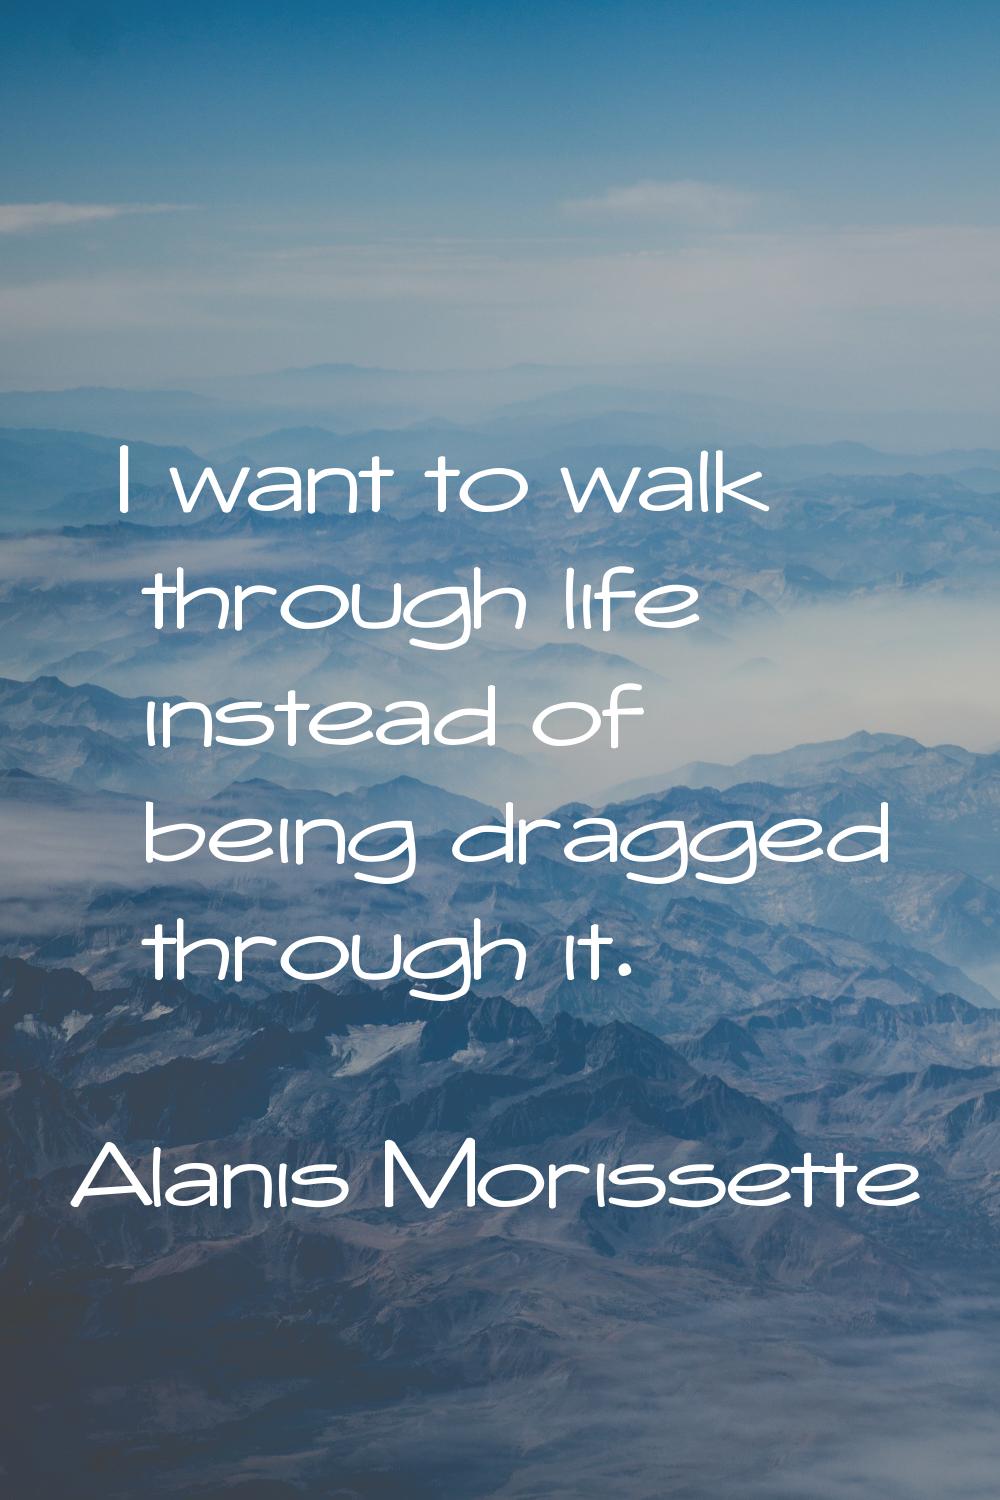 I want to walk through life instead of being dragged through it.